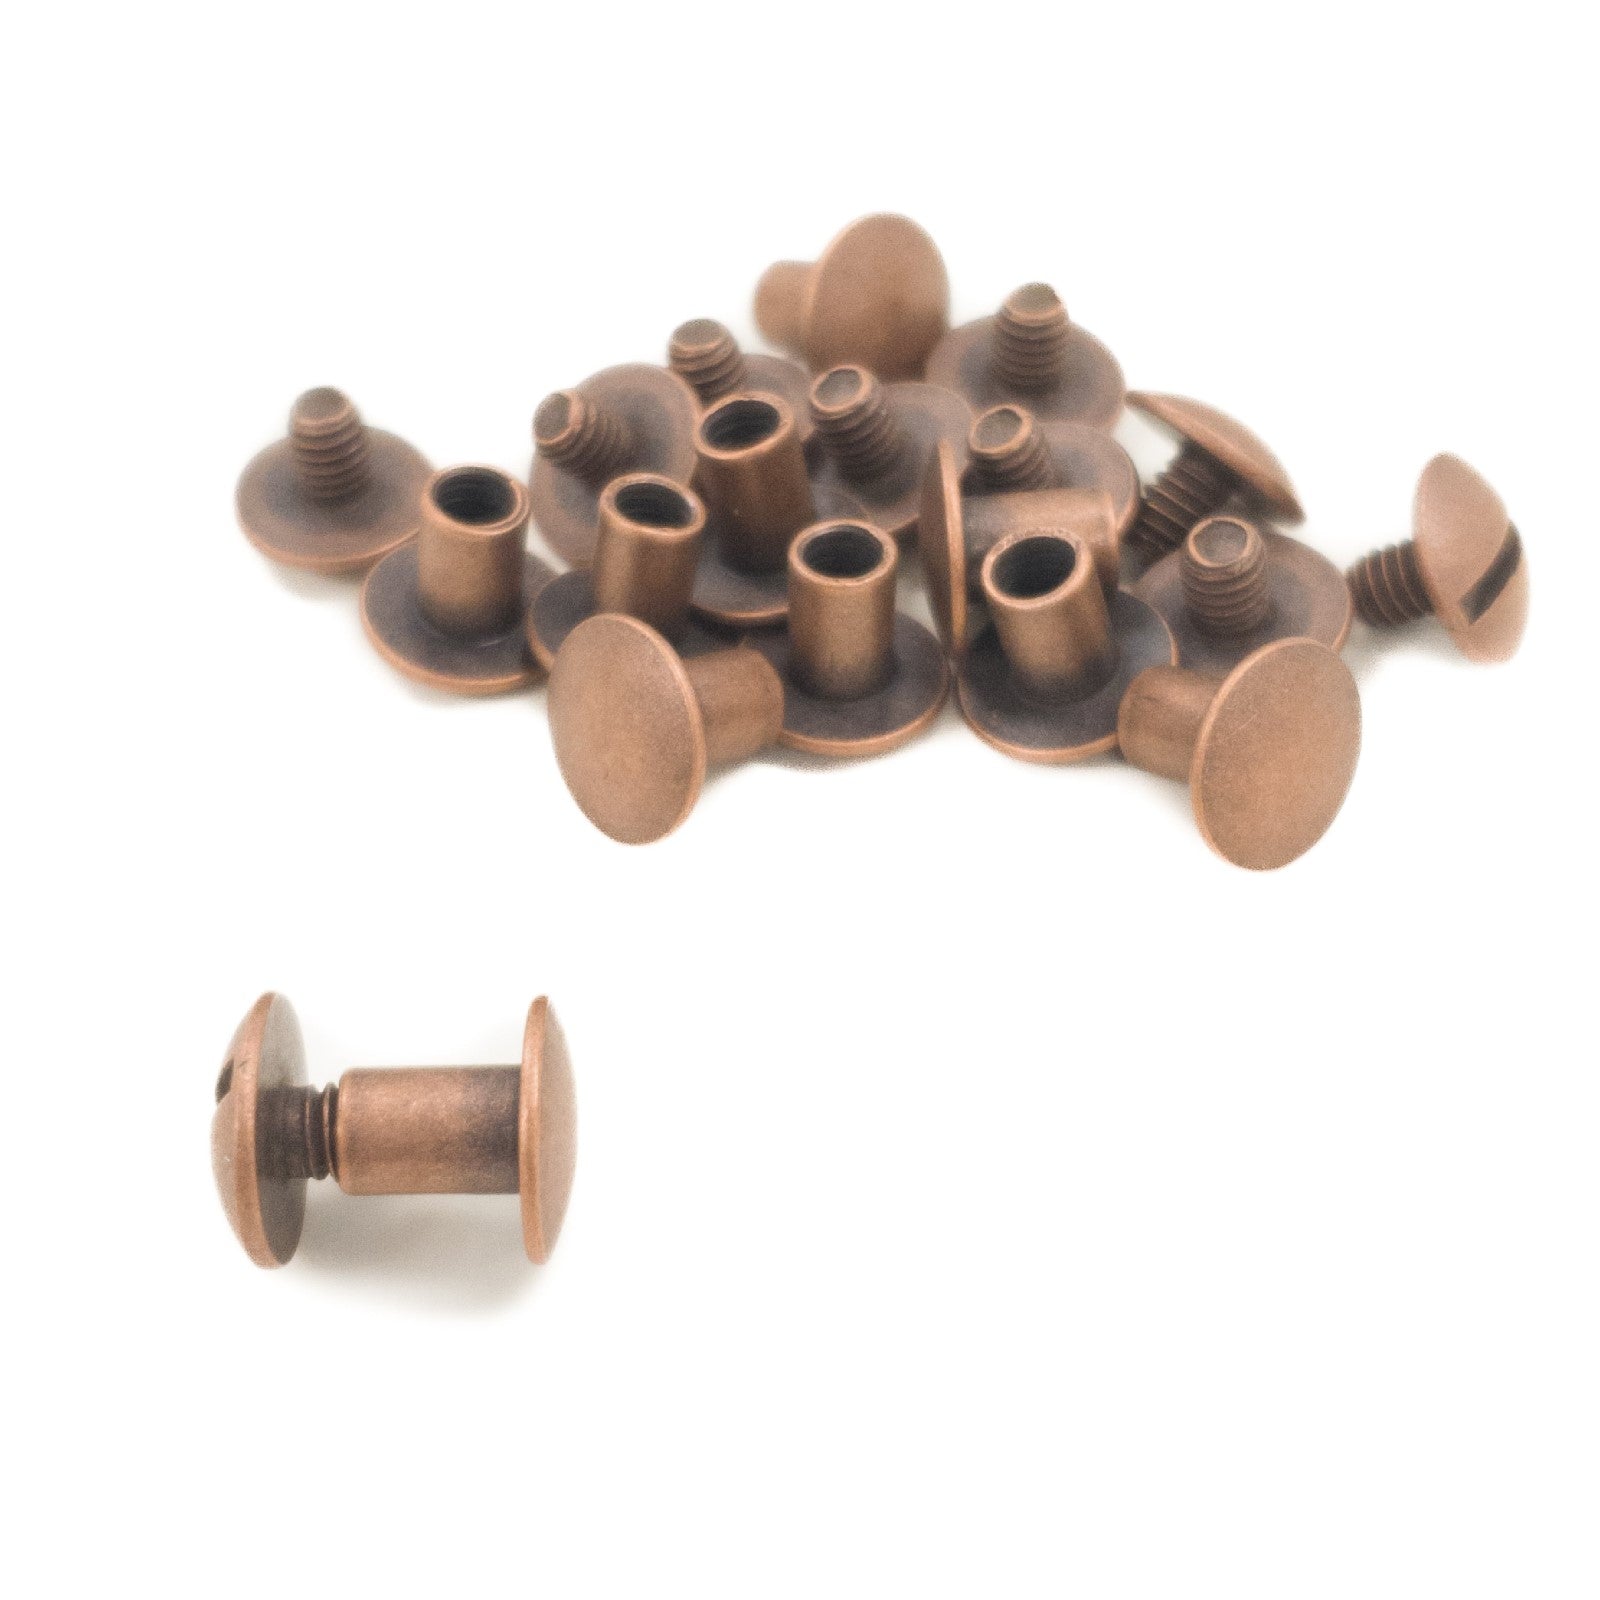 Chicago Screws, 6 mm/ 1/4", Antique Copper / 10 Pack | The Leather Guy